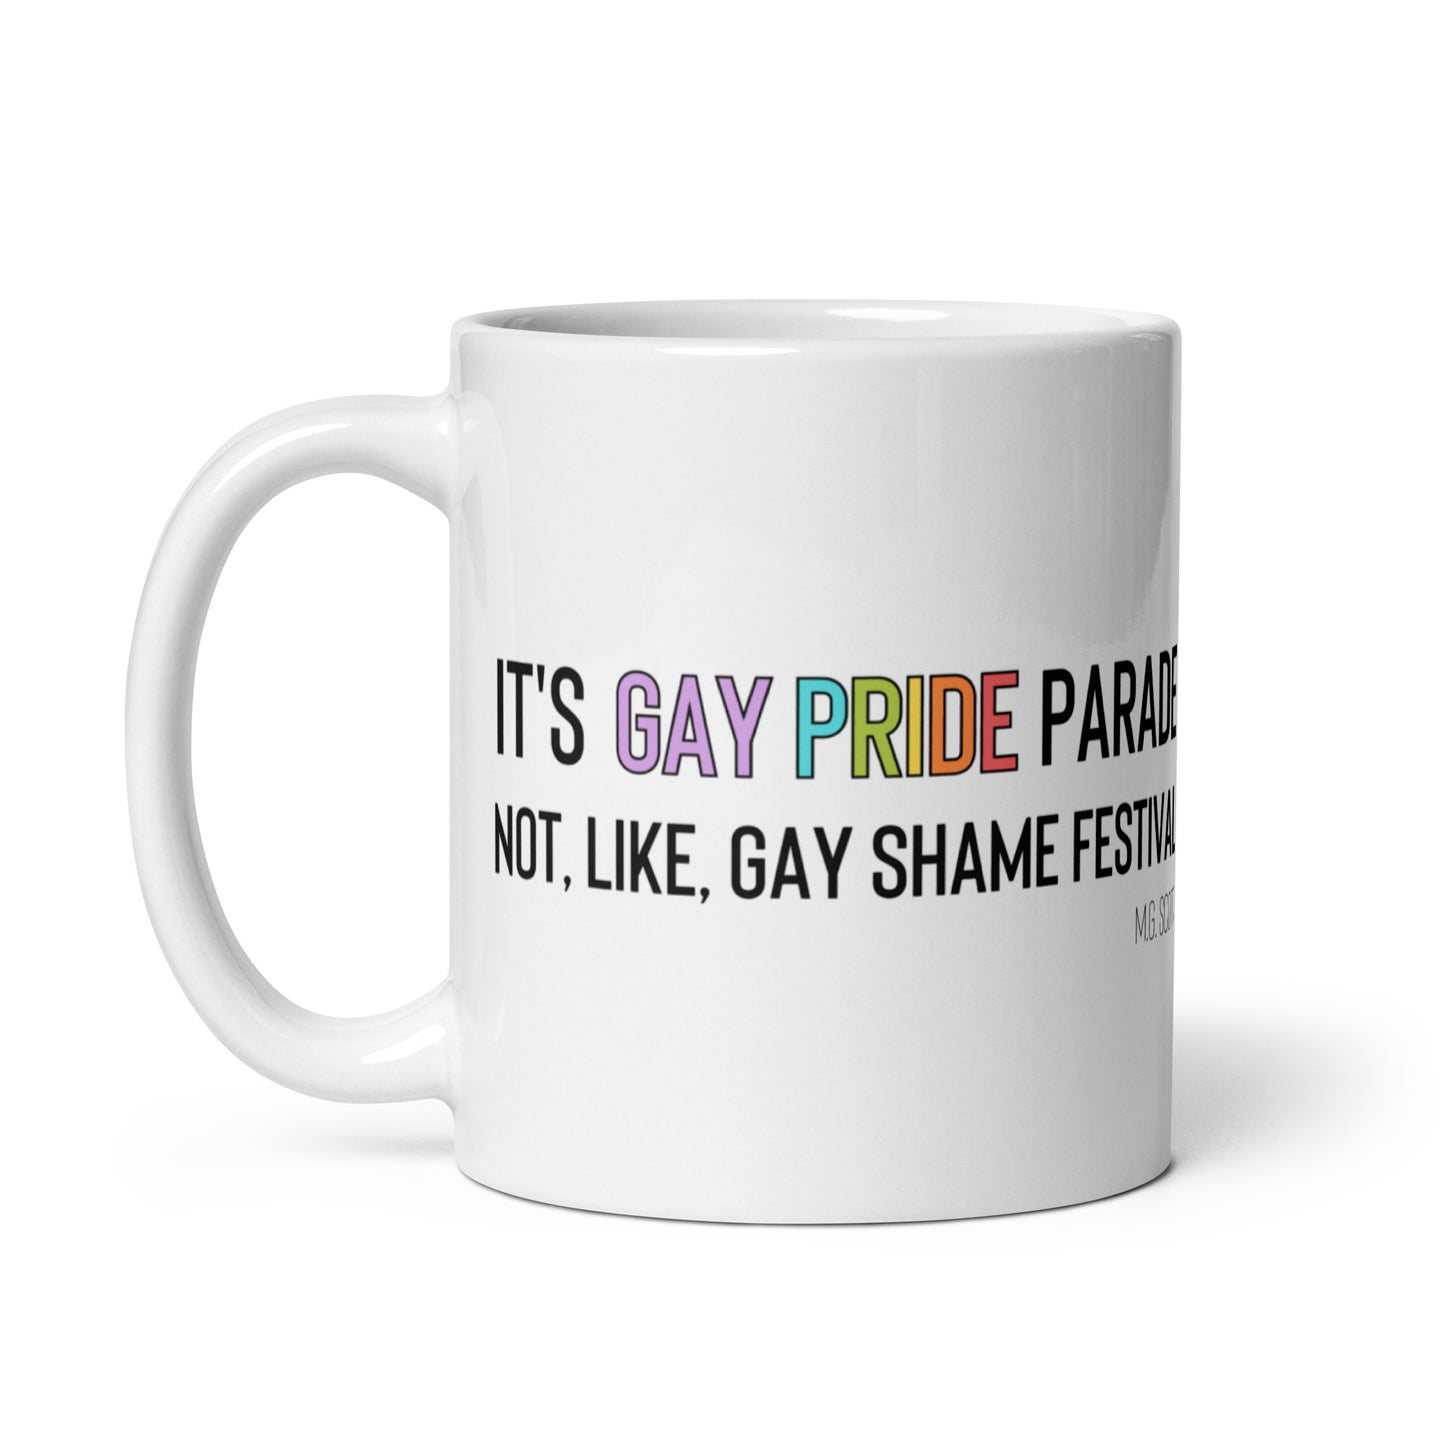 Gay Pride Parade Mug Inspired From The Office